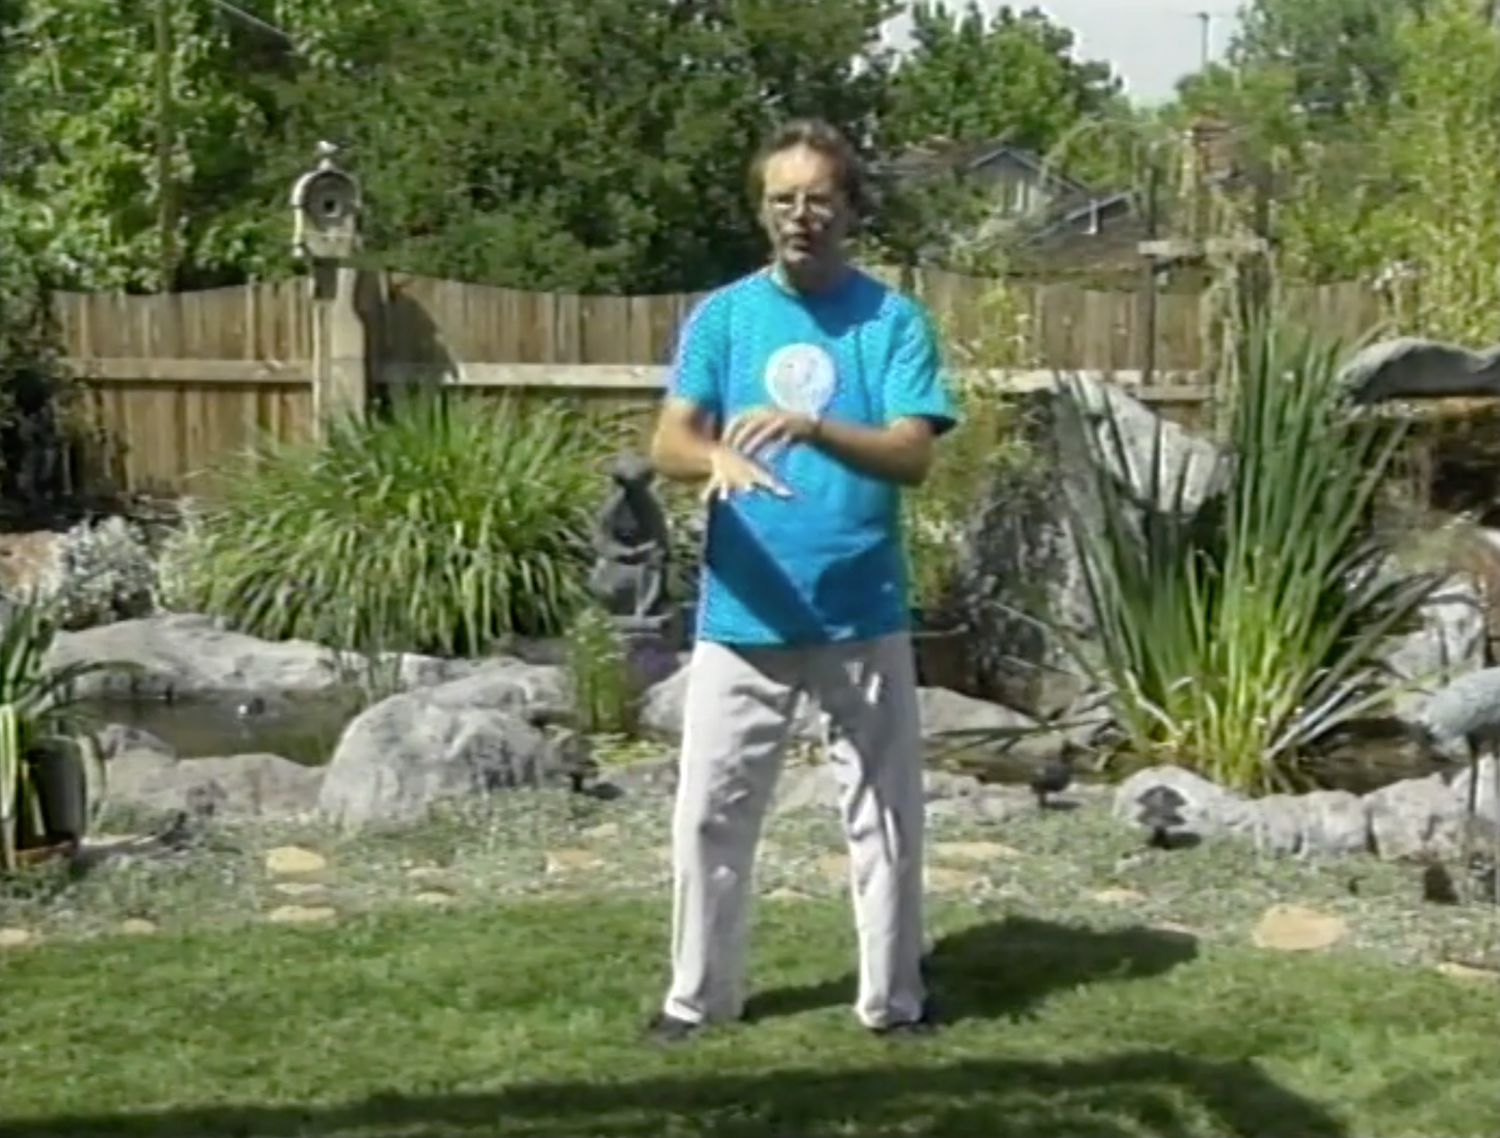 Tai Chi for Seniors DVD by Mark Johnson (Preowned)